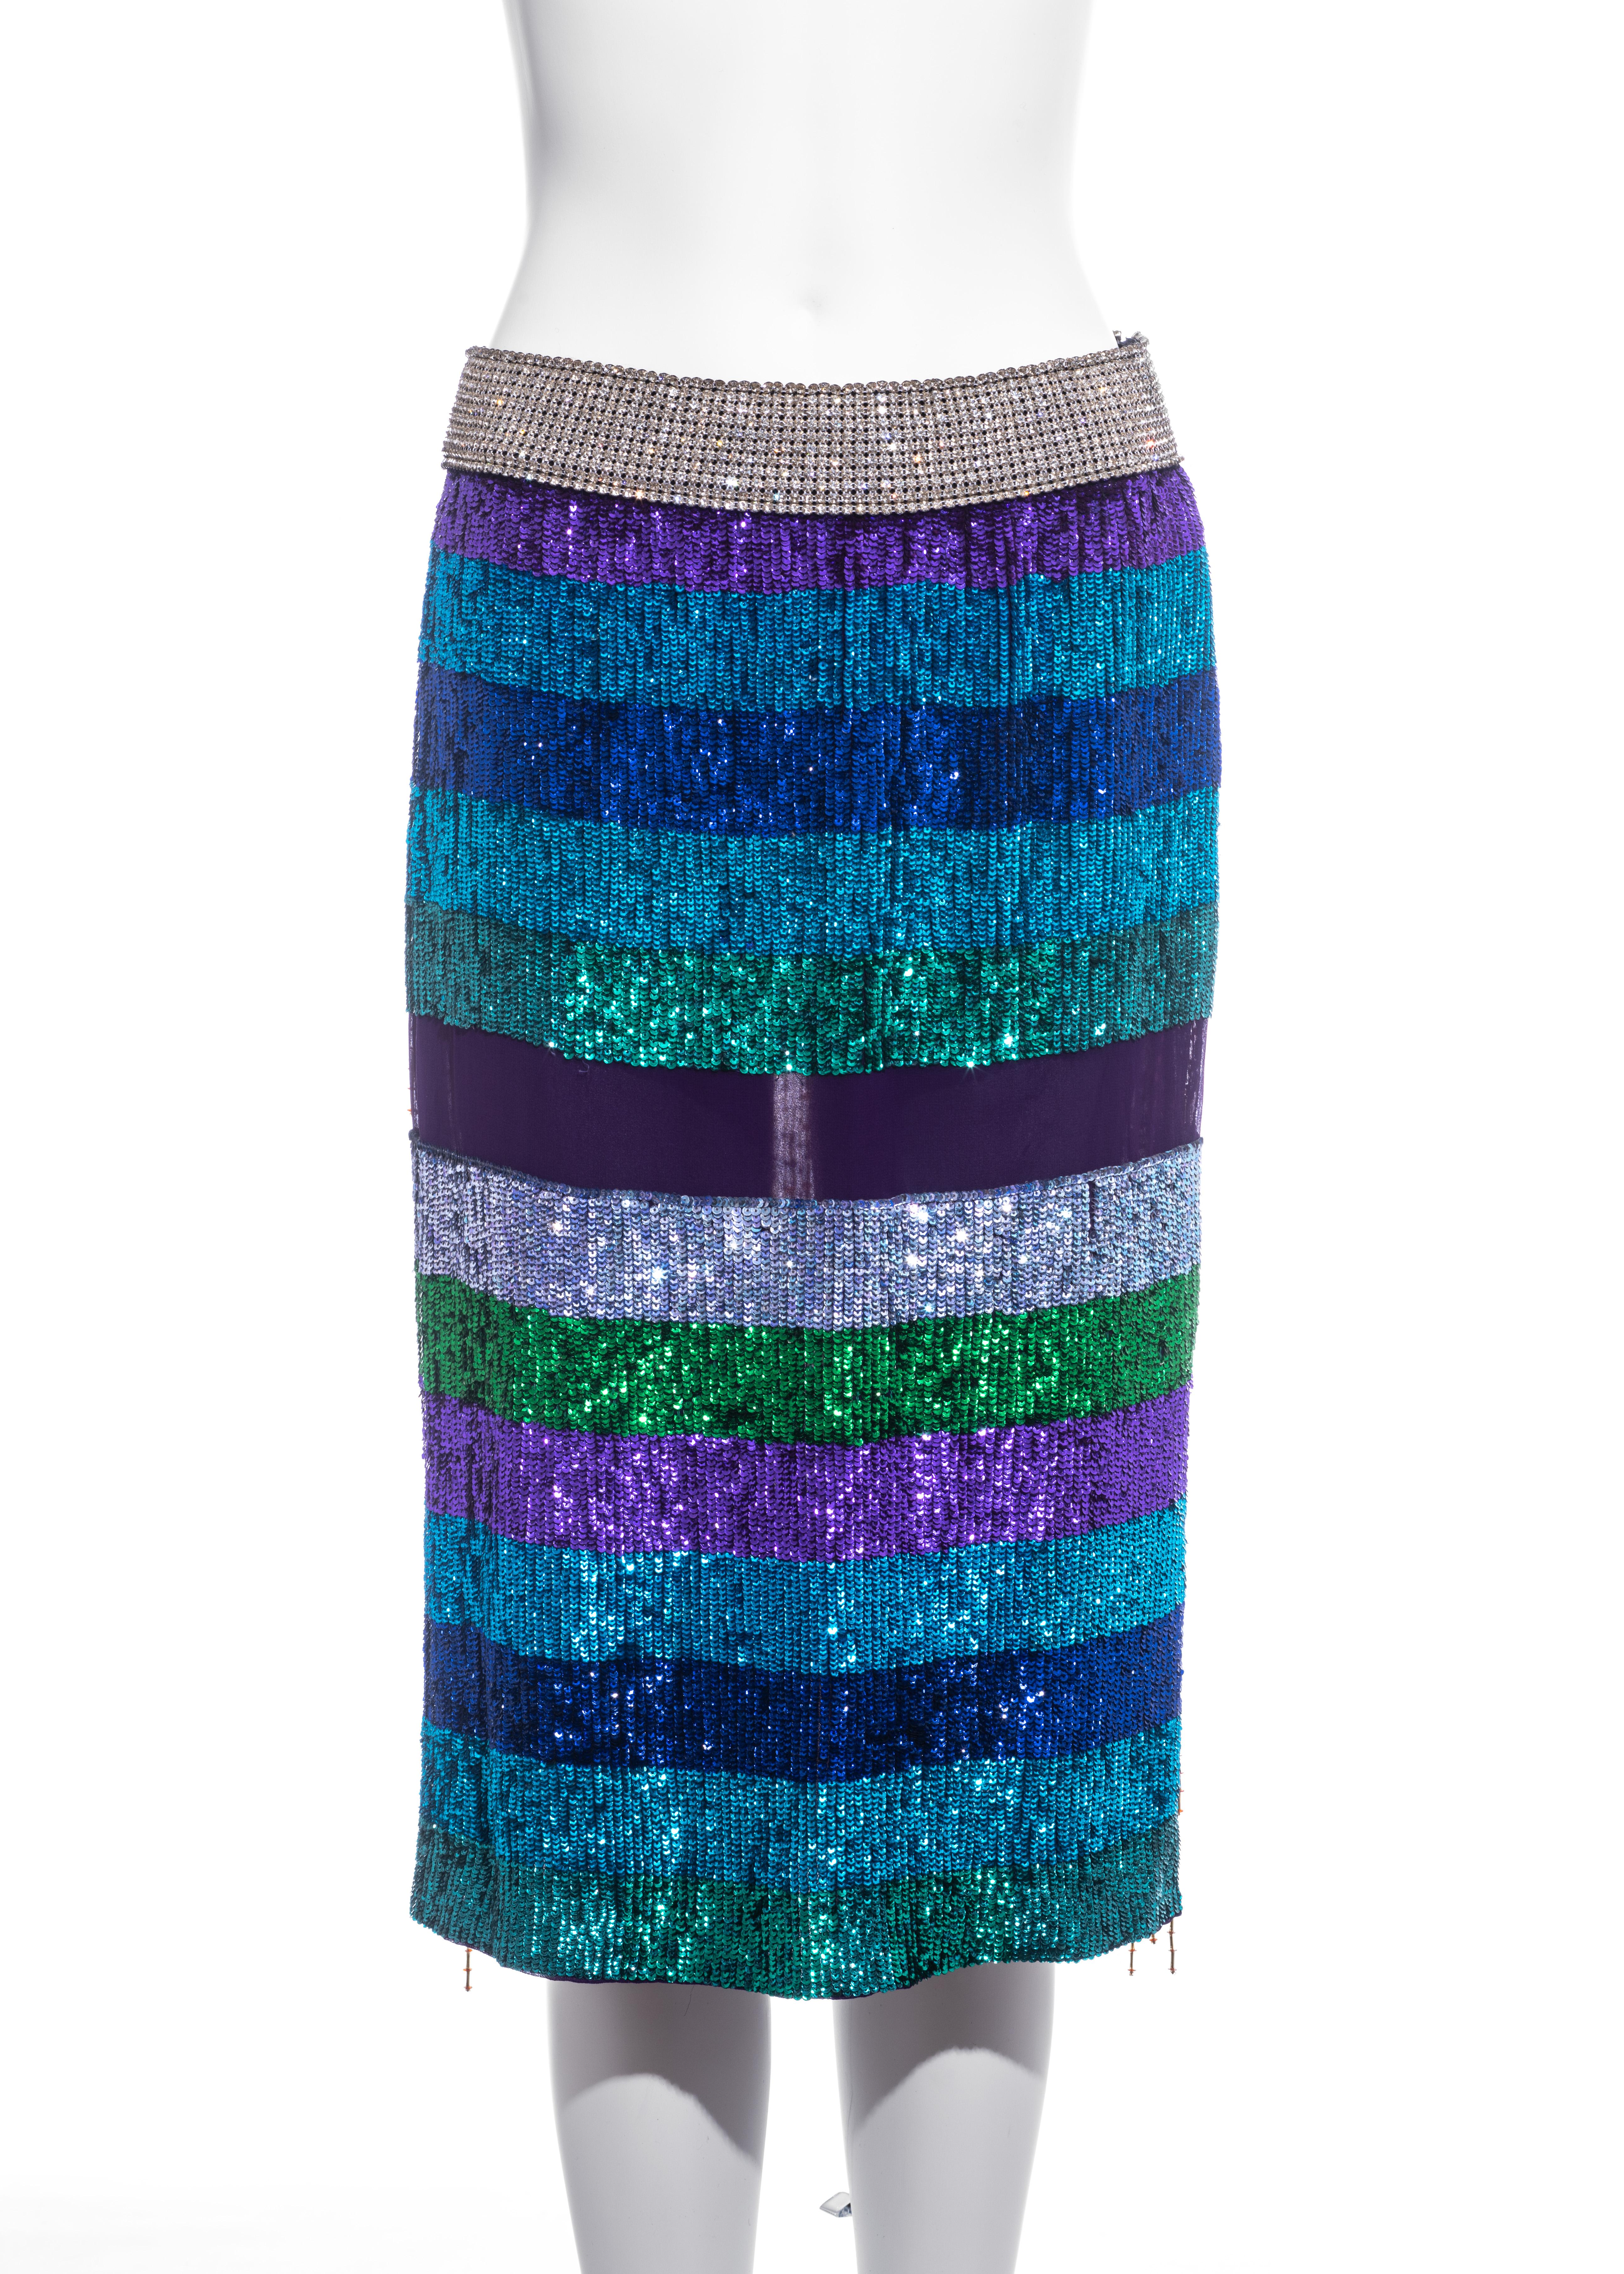 ▪ Striped sequin evening skirt 
▪ Rhinestone mesh waistband 
▪ Tiger print on. back panel with hanging beaded tassels 
▪ 100% silk 
▪ IT 40 - FR 36 - UK 8 - US 4
▪ Spring-Summer 2000